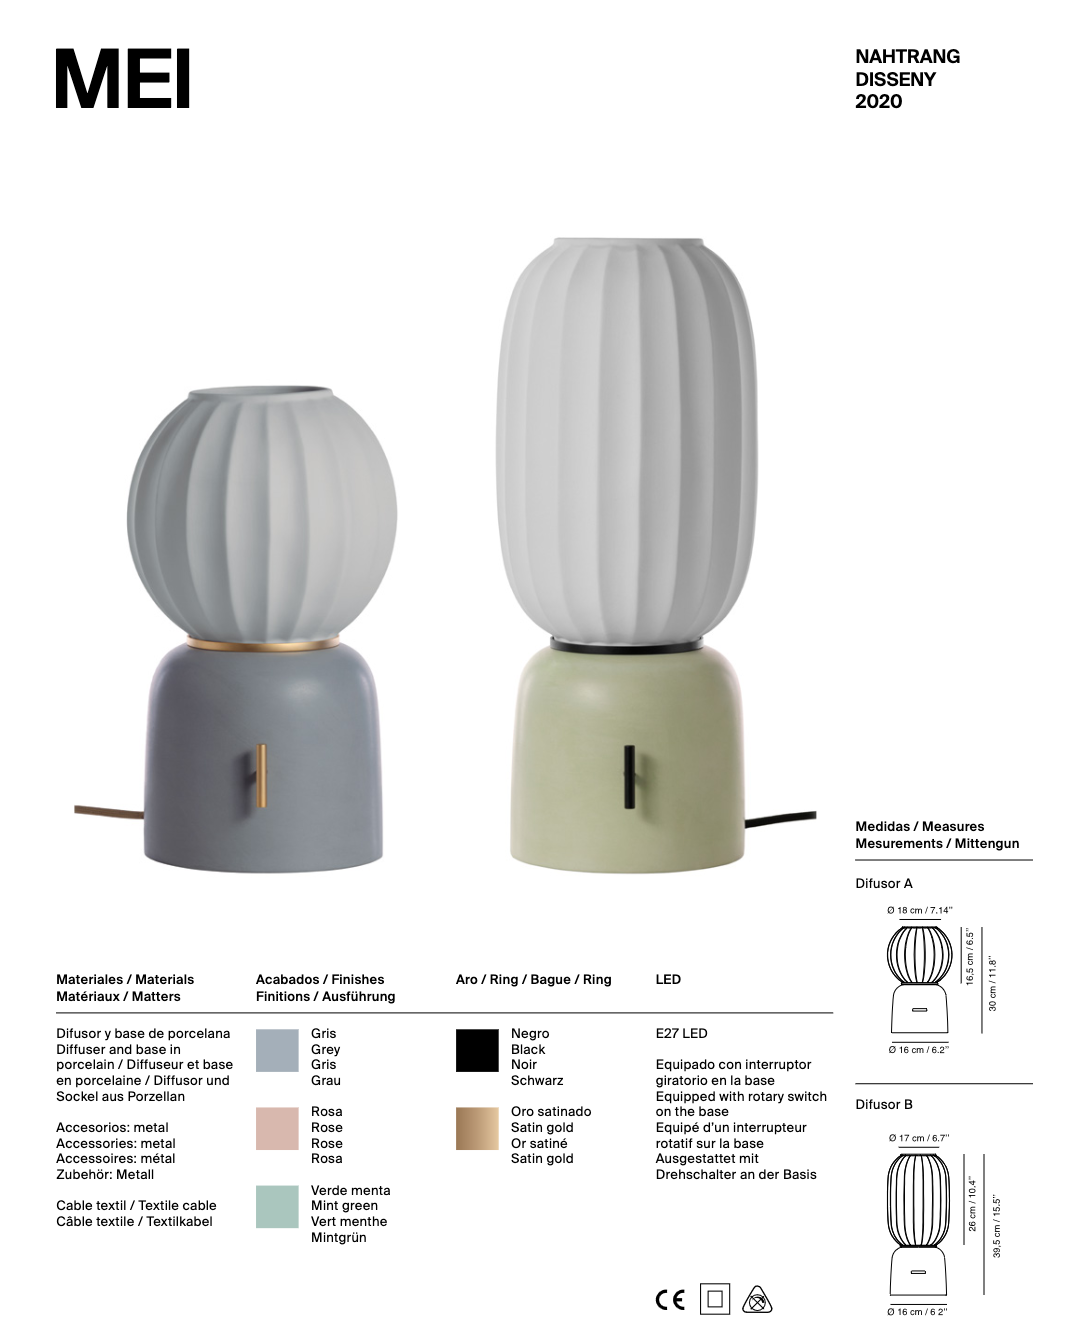 Mei Porcelain Lamp - Artistic Addition to Any Space